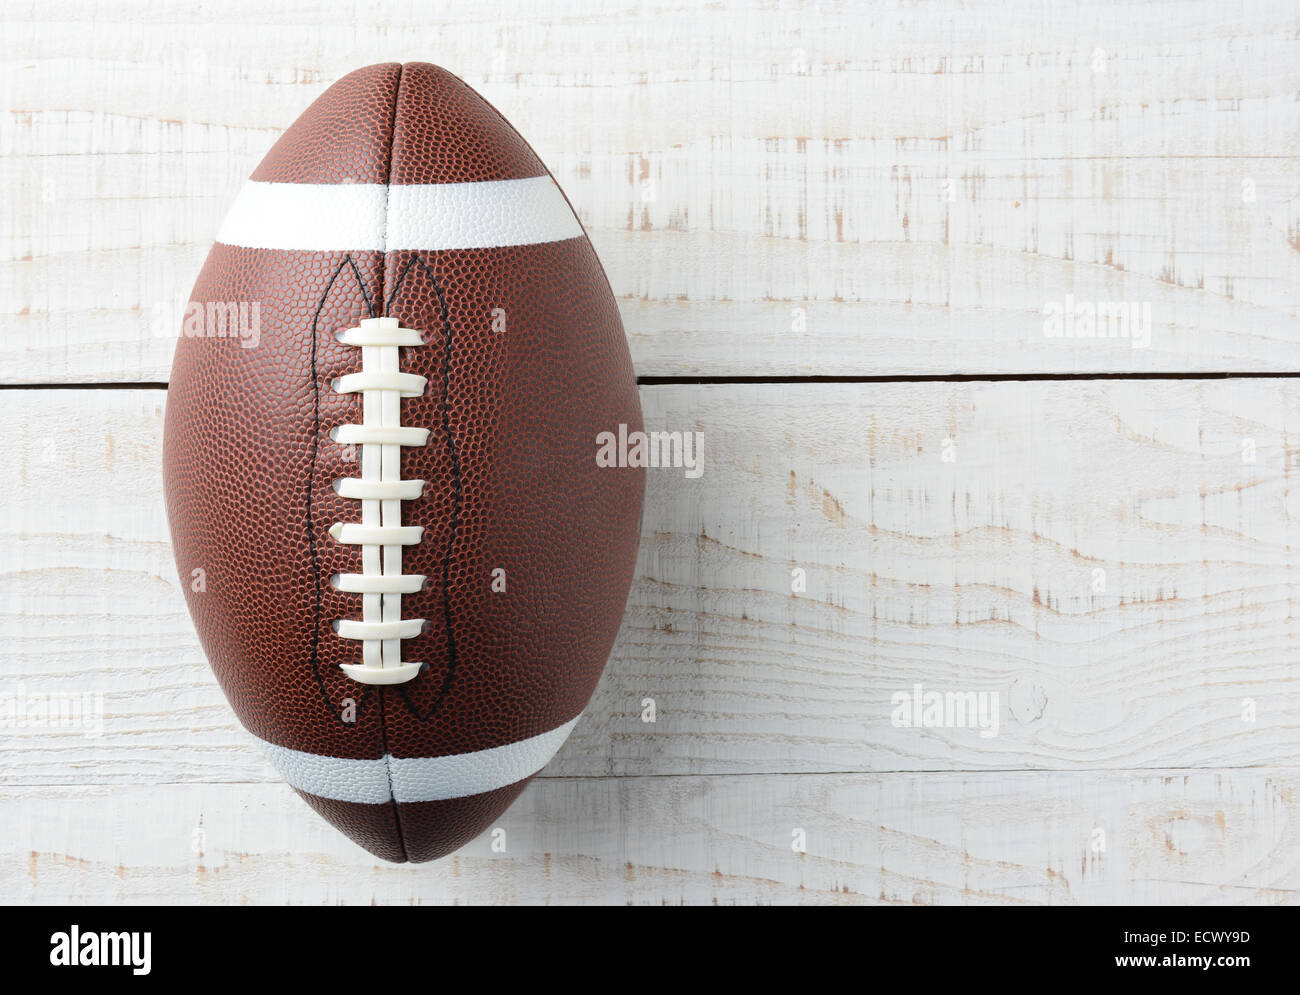 Closeup overhead shot of an American collegiate style football on a whitewashed wood table. The ball is offset ot the left with Stock Photo